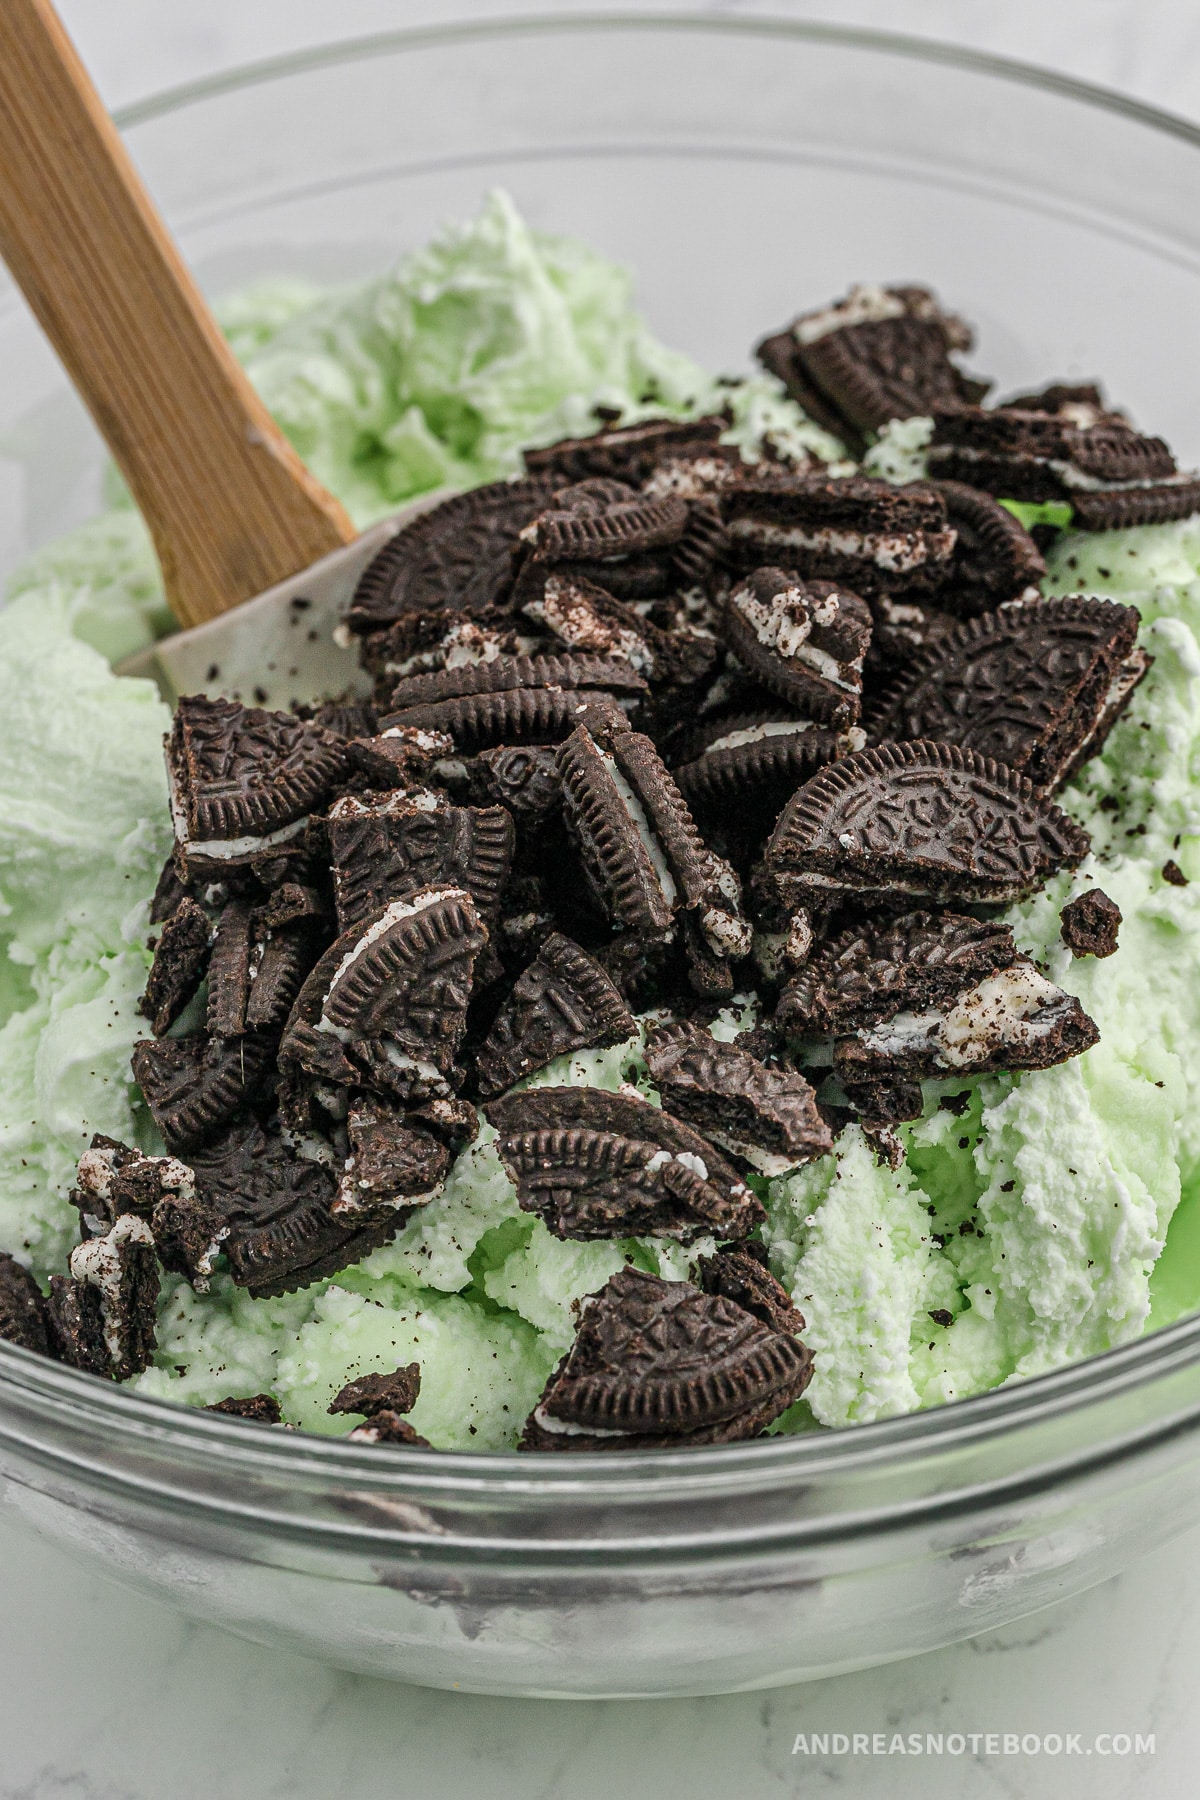 Oreo crumbles being stirred into mint ice cream.